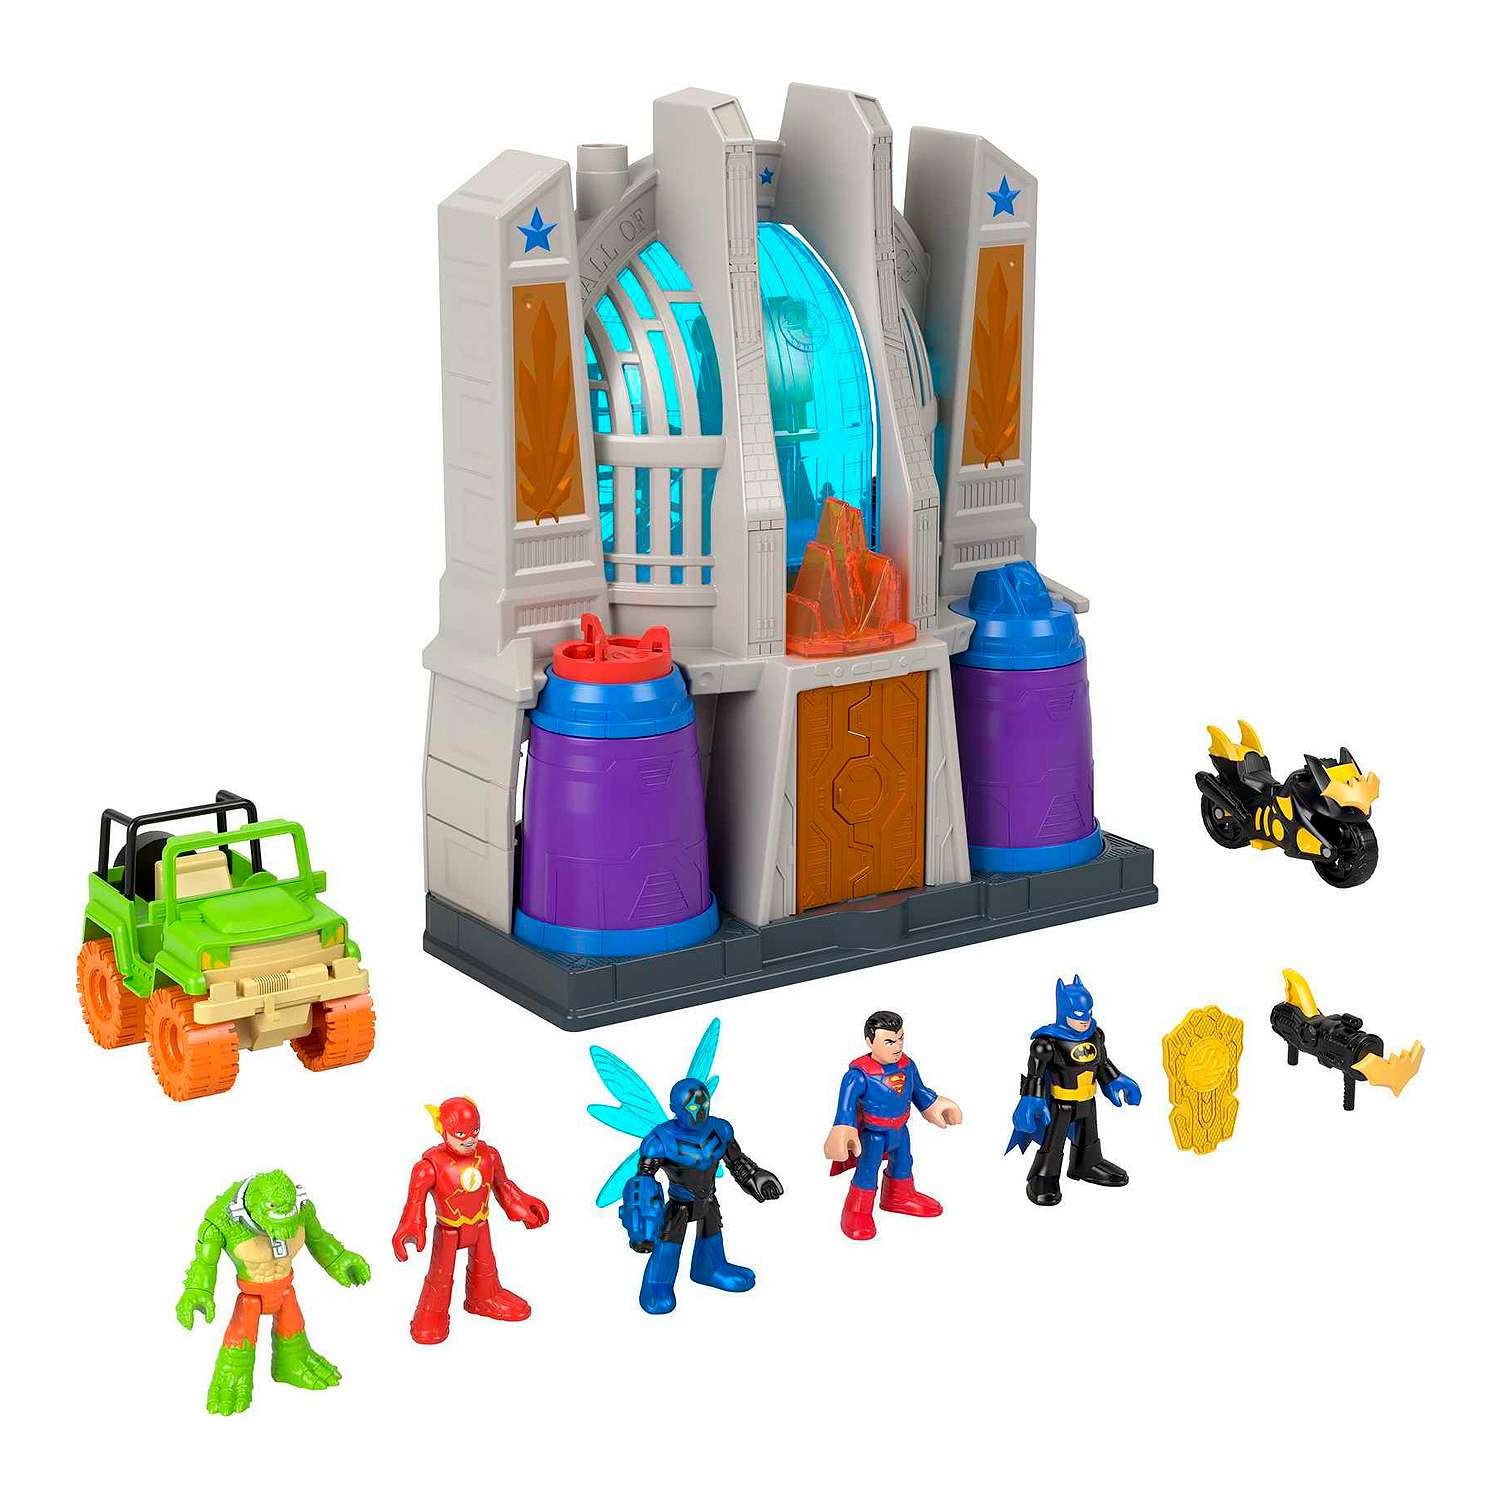 Fisher-Price Toys: Little People Supermarket Gift Set $35, Imaginext DC Super Friends Hall of Justice Playset  $42 & More + Free Store Pickup at Kohl's or F/S on Orders $49+